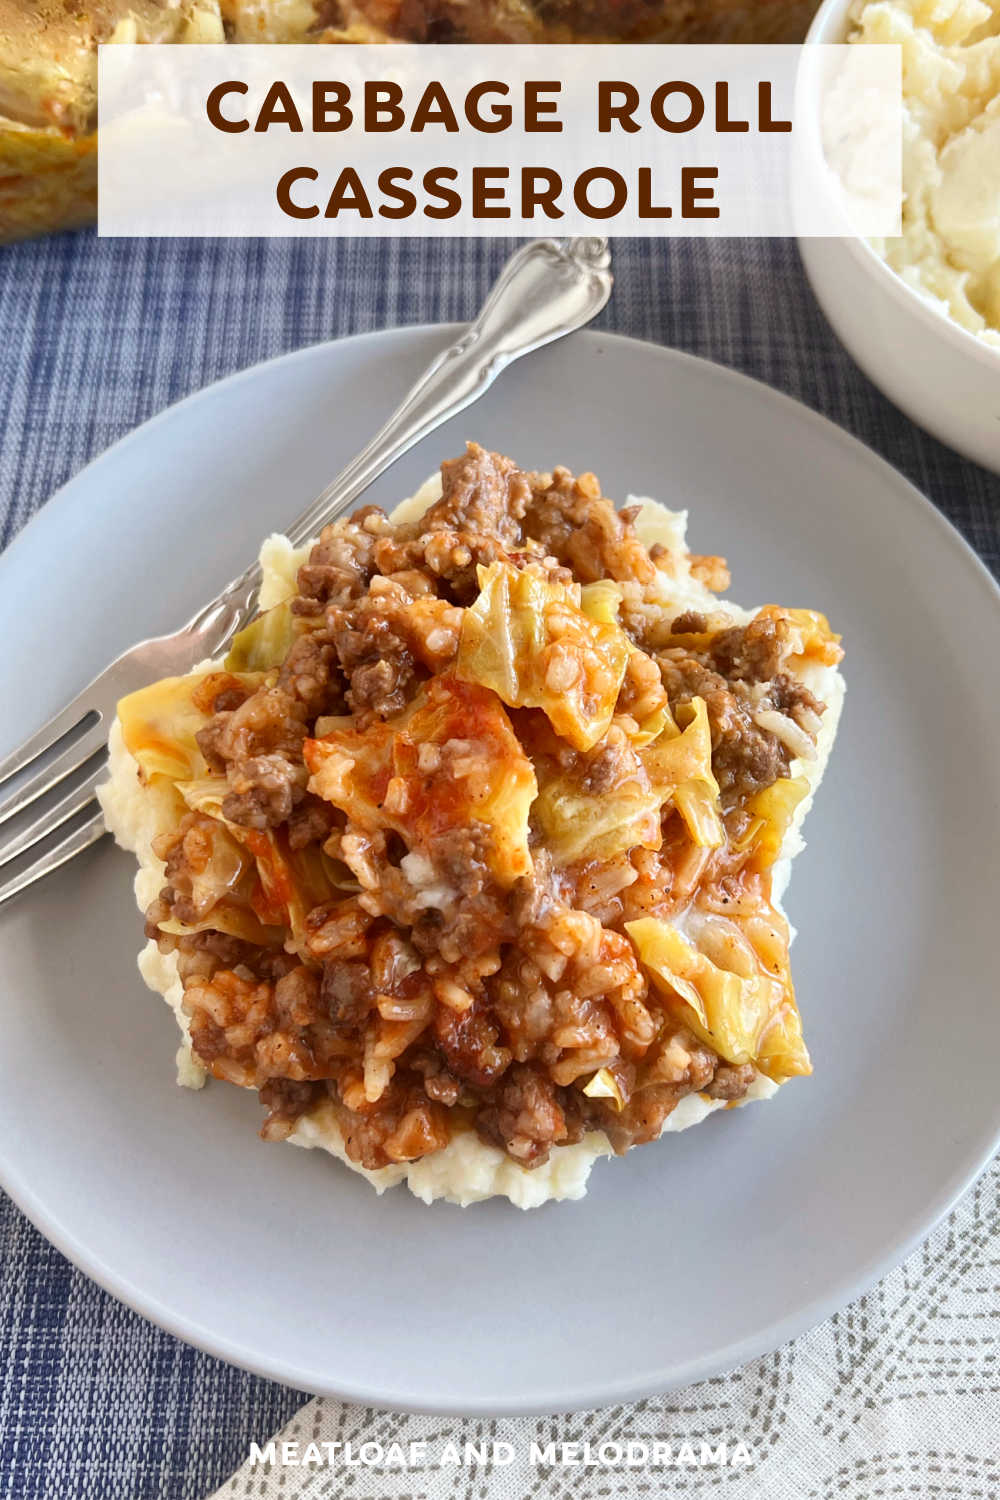 Cabbage Roll Casserole made with meat, rice and cabbage in tomato sauce tastes like traditional cabbage rolls without all of the work. Unstuffed cabbage roll casserole or lazy Halupki is an easy weeknight dinner the whole family will love! via @meamel